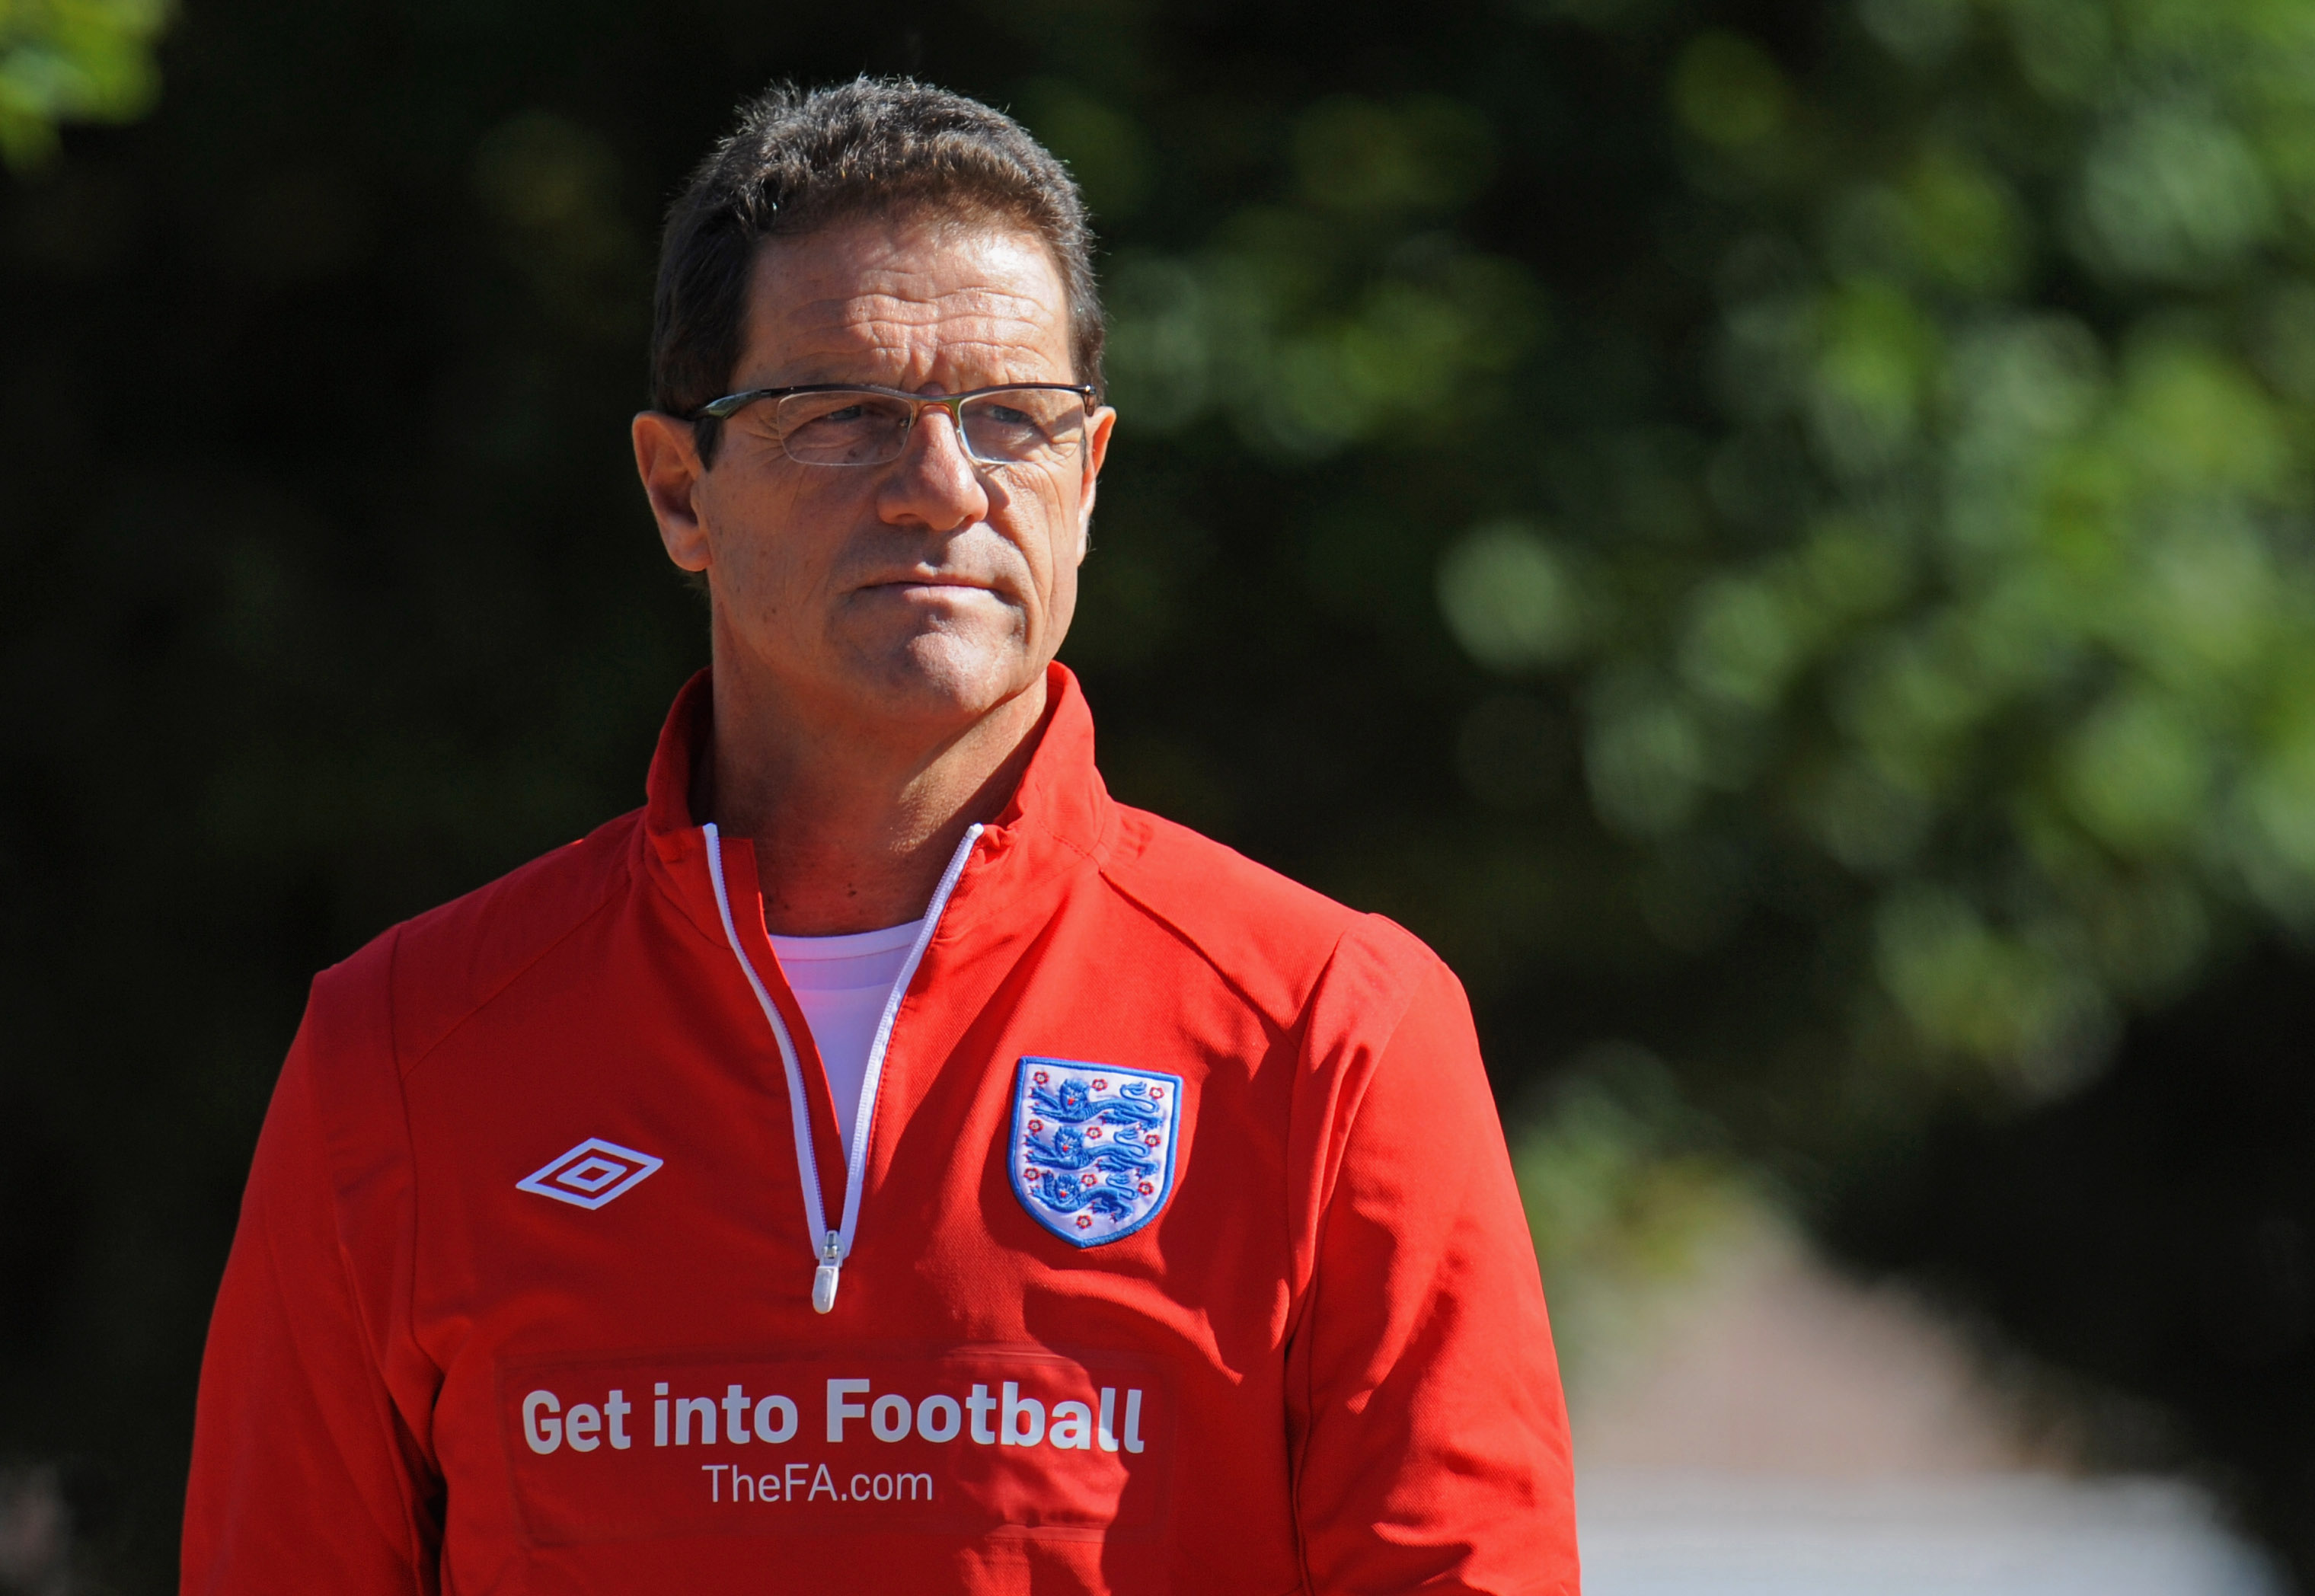 ST ALBANS, ENGLAND - AUGUST 31:  Engand manager Fabio Capello arrives for the England training session at London Colney on August 31, 2010 in St Albans, England.  (Photo by Michael Regan/Getty Images)